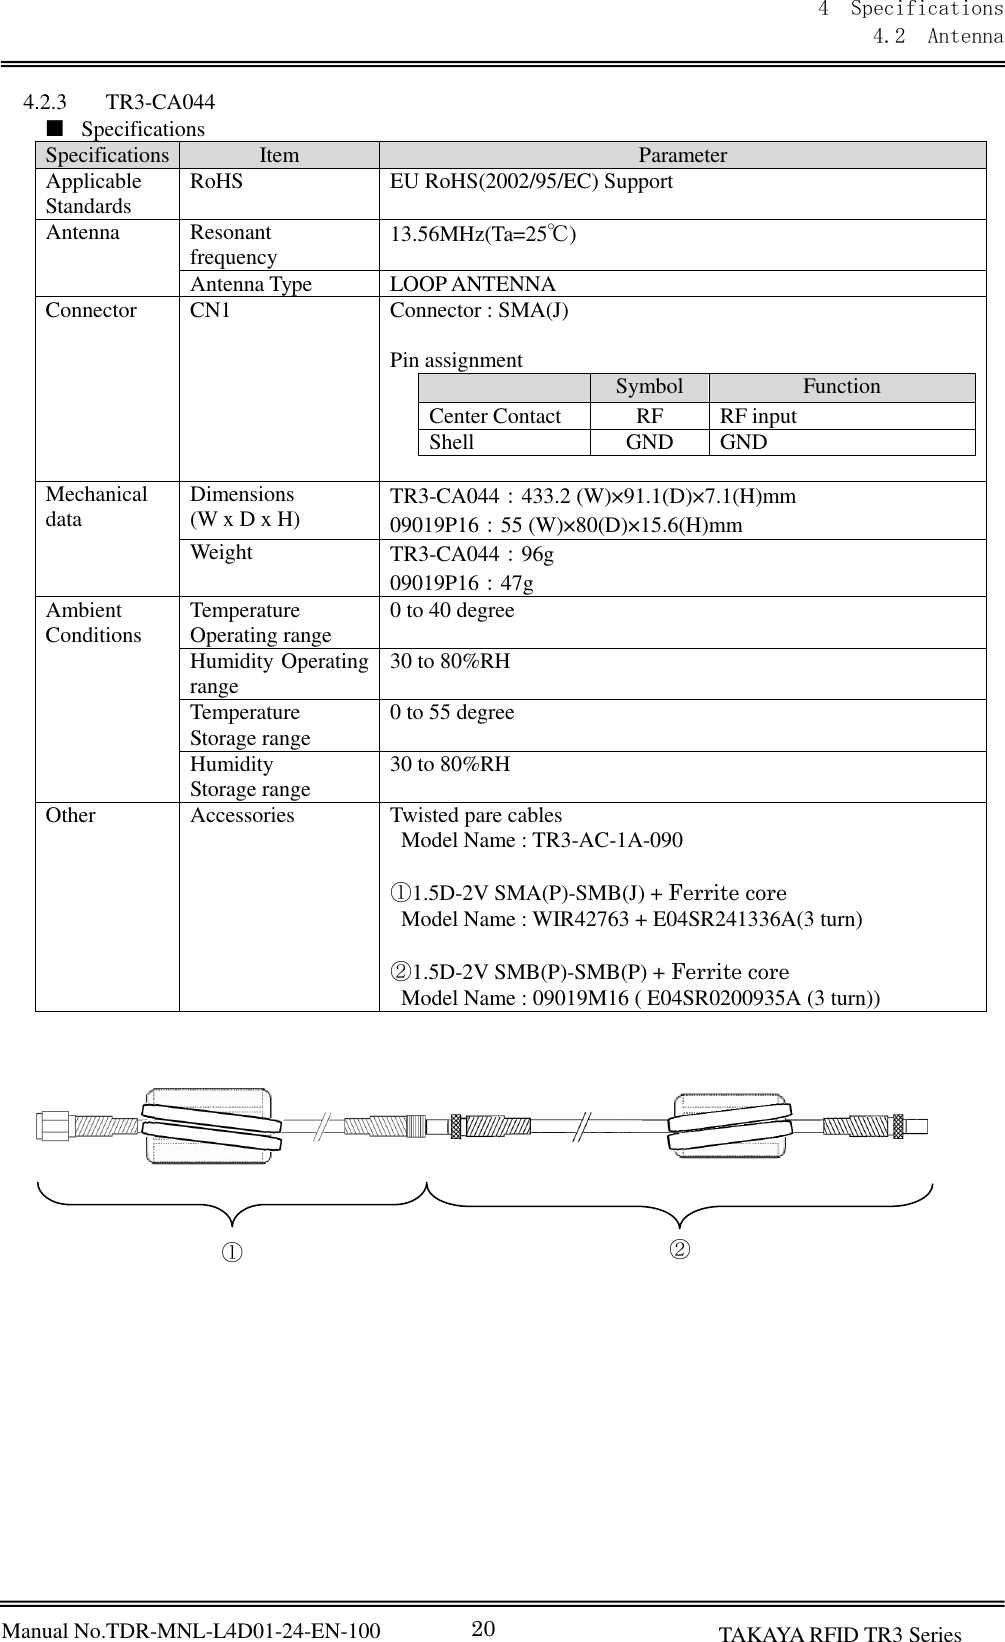 Manual No.TDR-MNL-L4D01-24-EN-100 4  Specifications 4.2  Antenna 20 TAKAYA RFID TR3 Series  4.2.3 TR3-CA044 ■ Specifications Specifications Item Parameter Applicable Standards RoHS EU RoHS(2002/95/EC) Support Antenna Resonant frequency 13.56MHz(Ta=25℃) Antenna Type LOOP ANTENNA Connector CN1 Connector : SMA(J)  Pin assignment  Symbol Function Center Contact RF RF input Shell GND GND    Mechanical data Dimensions (W x D x H) TR3-CA044：433.2 (W)×91.1(D)×7.1(H)mm 09019P16：55 (W)×80(D)×15.6(H)mm Weight TR3-CA044：96g 09019P16：47g Ambient Conditions Temperature Operating range 0 to 40 degree Humidity Operating range 30 to 80%RH Temperature Storage range 0 to 55 degree Humidity Storage range 30 to 80%RH Other Accessories Twisted pare cables   Model Name : TR3-AC-1A-090  ①1.5D-2V SMA(P)-SMB(J) + Ferrite core   Model Name : WIR42763 + E04SR241336A(3 turn)  ②1.5D-2V SMB(P)-SMB(P) + Ferrite core Model Name : 09019M16 ( E04SR0200935A (3 turn))     ① ② 